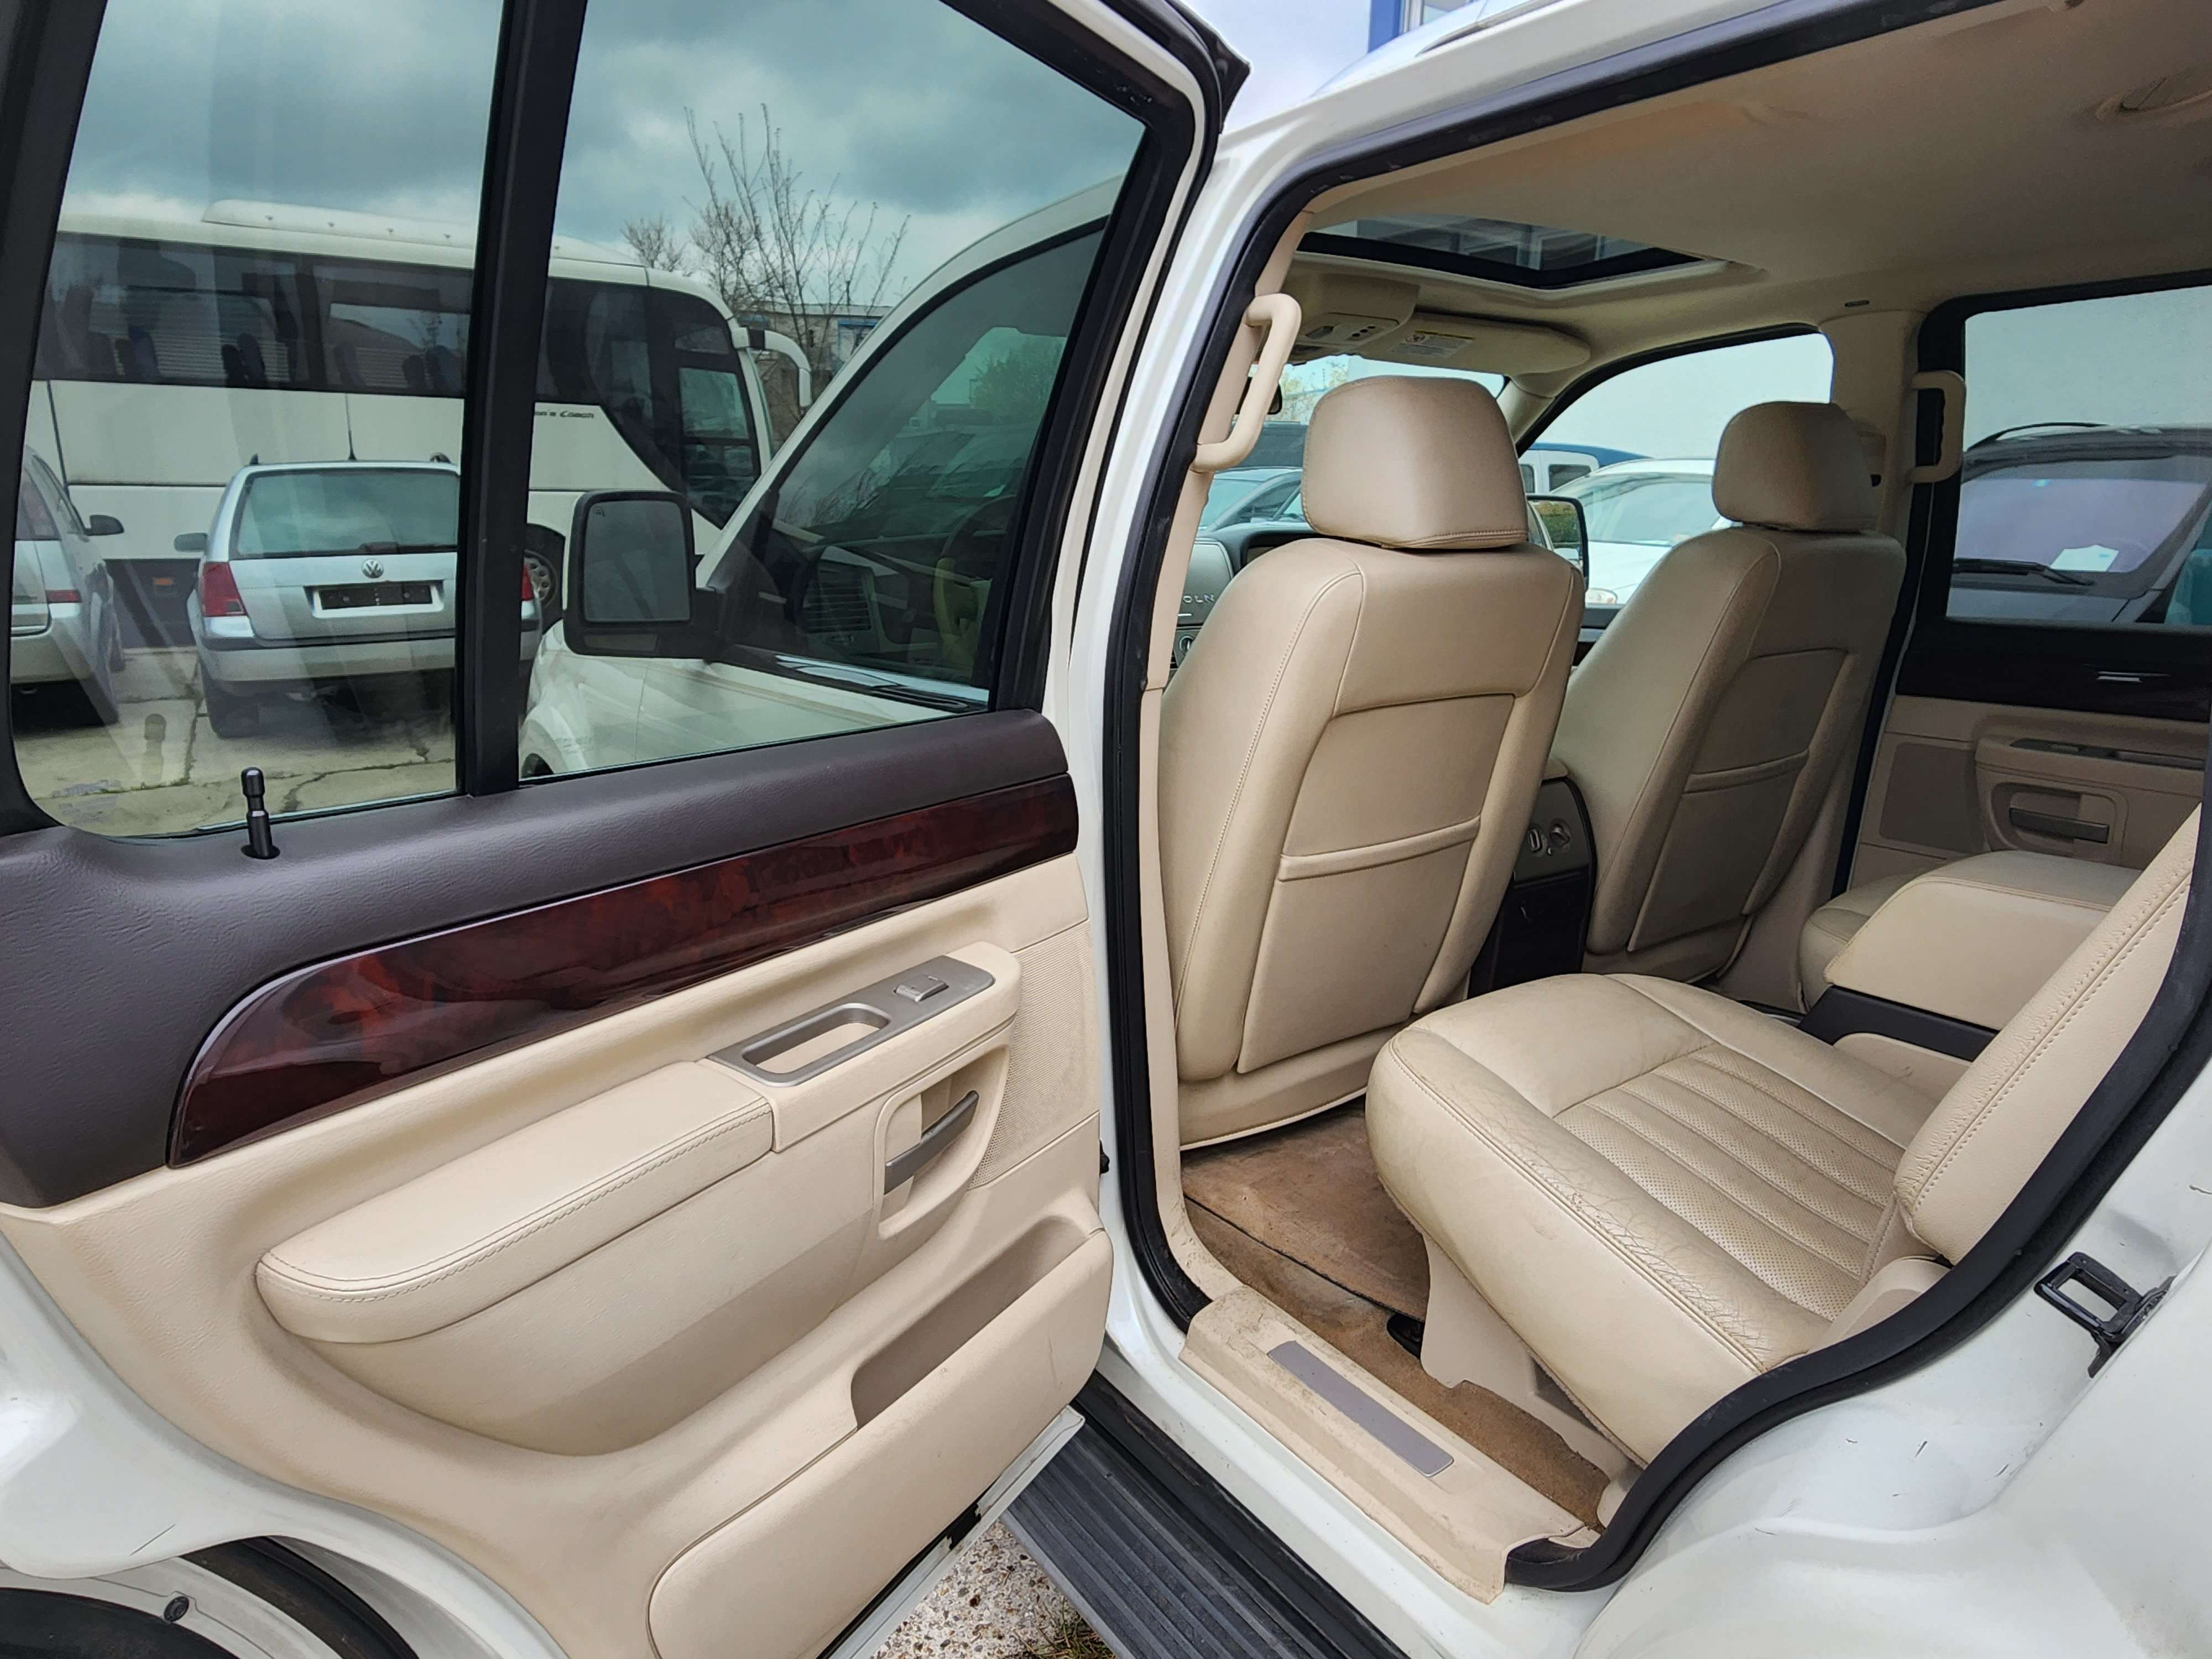 Lincoln Aviator Off-Road/Pick-up in White used in Ostfildern for € 5,000.-